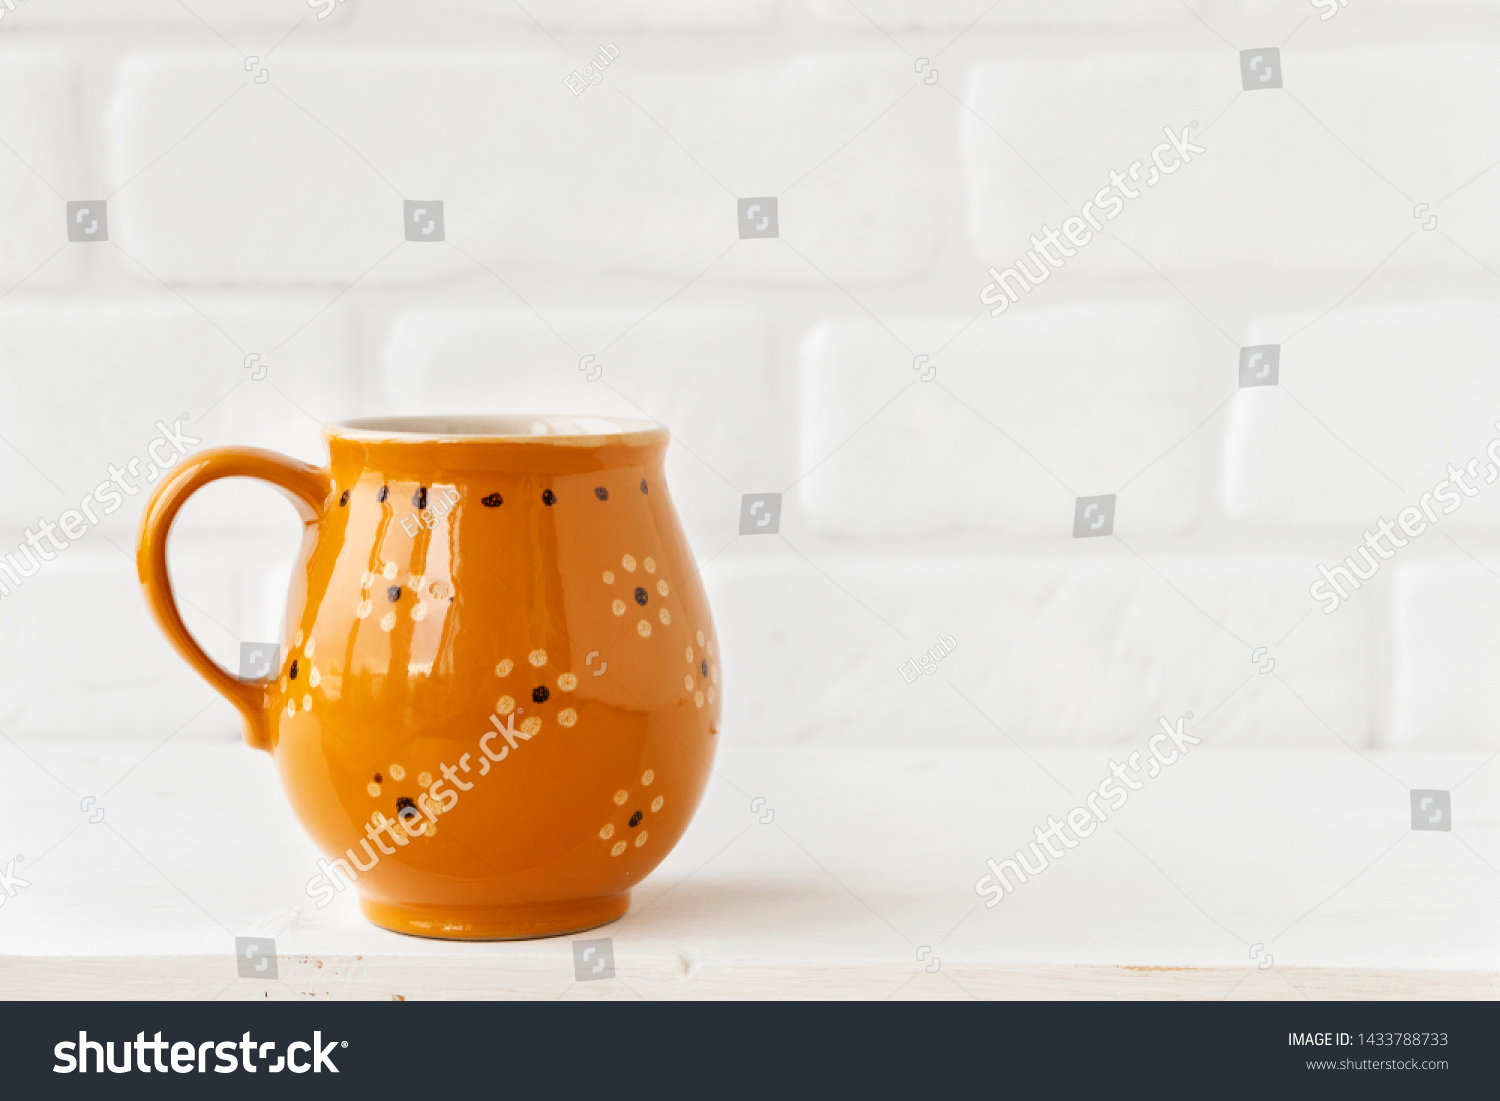 Brown rustic mug with flowers on white brick wall background. Copy space #1433788733